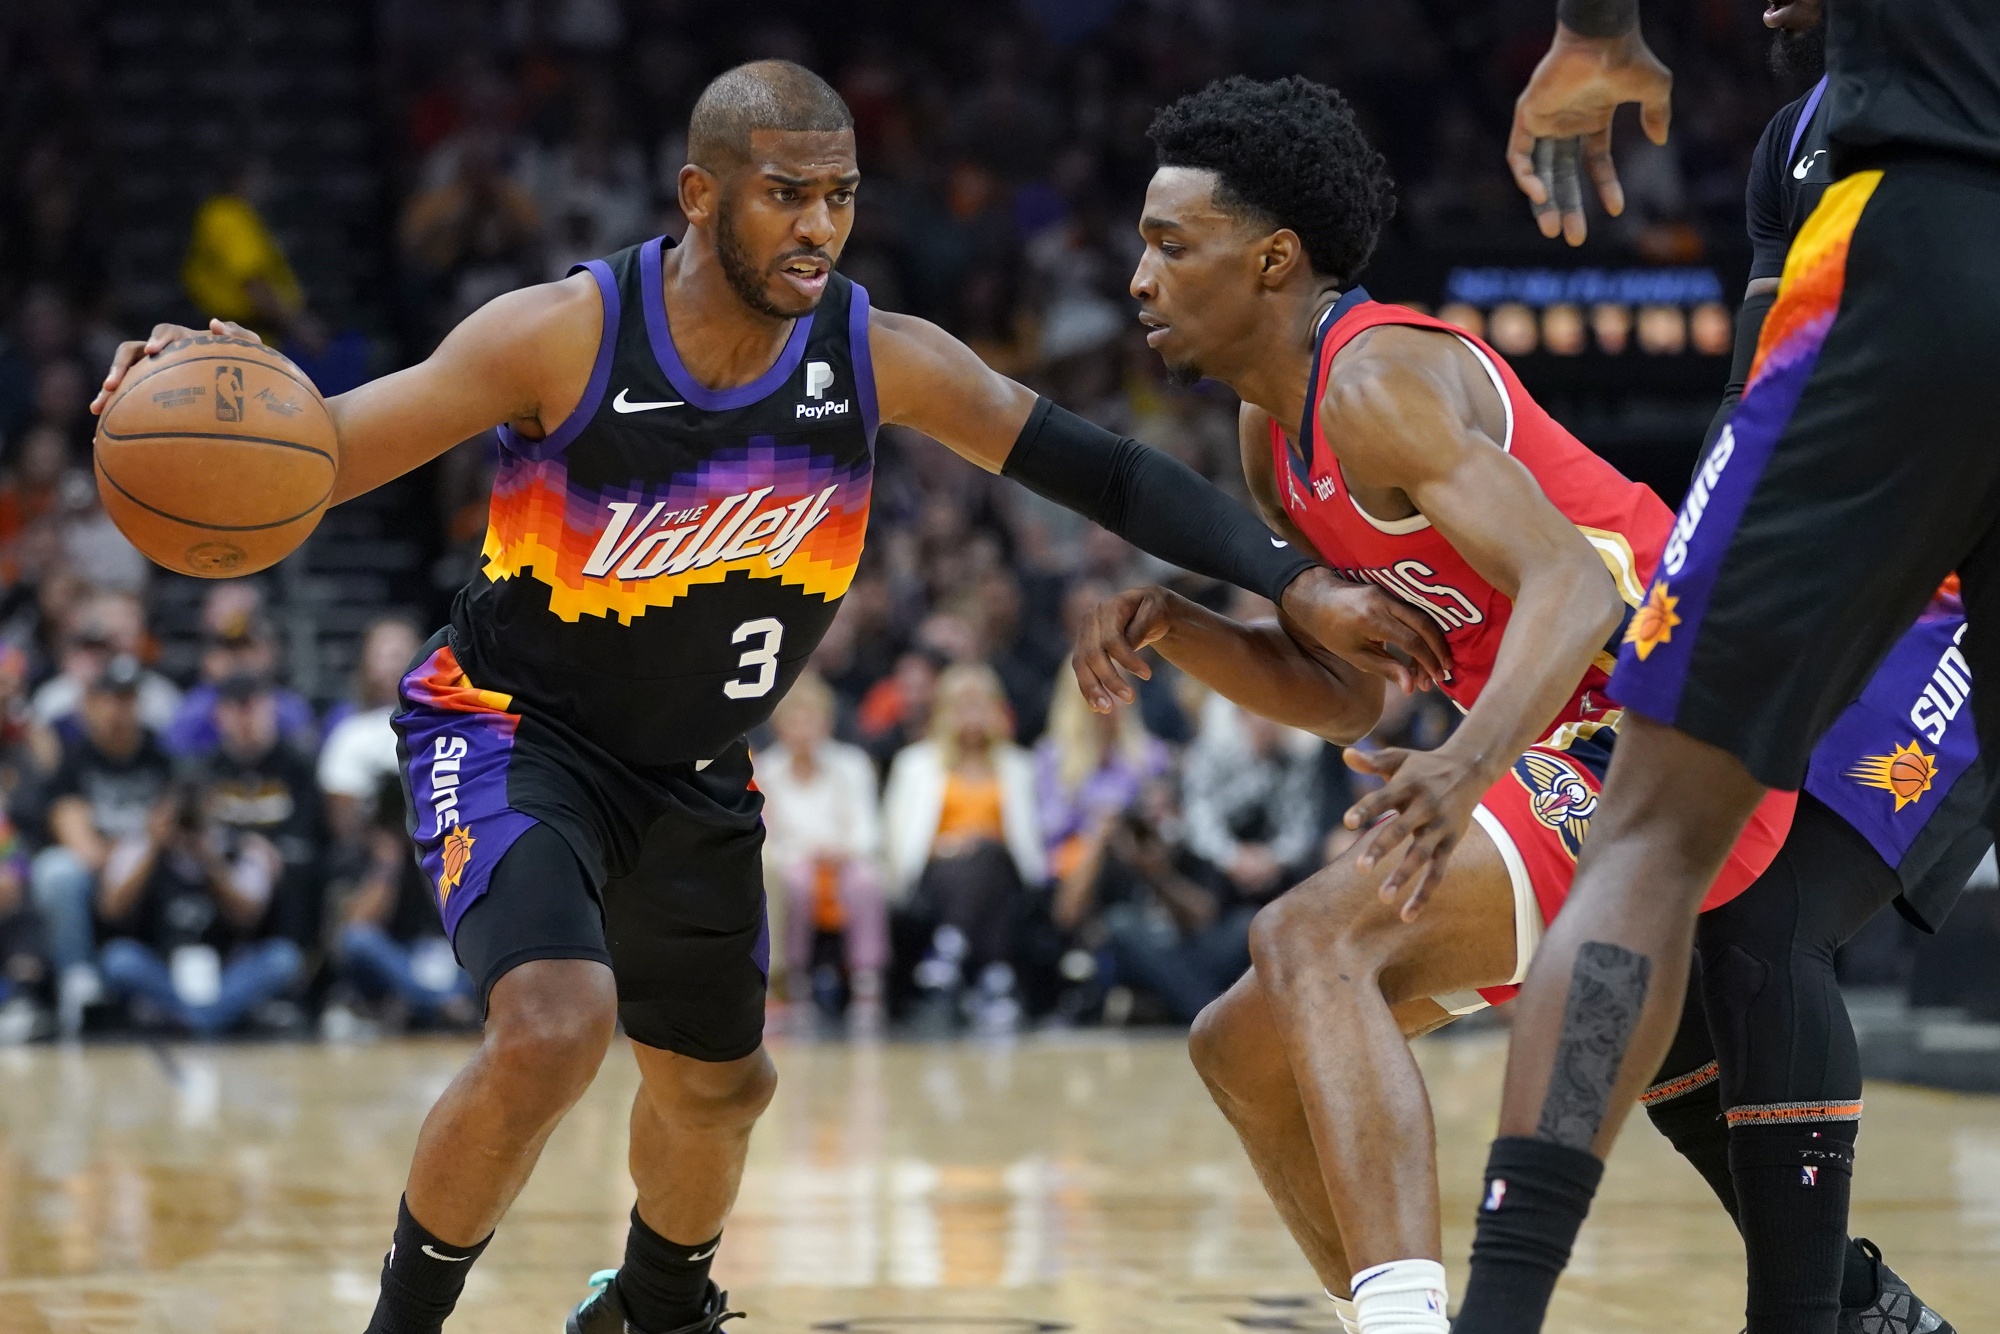 Chris Paul of the Phoenix Suns dribbles the ball against the Dallas